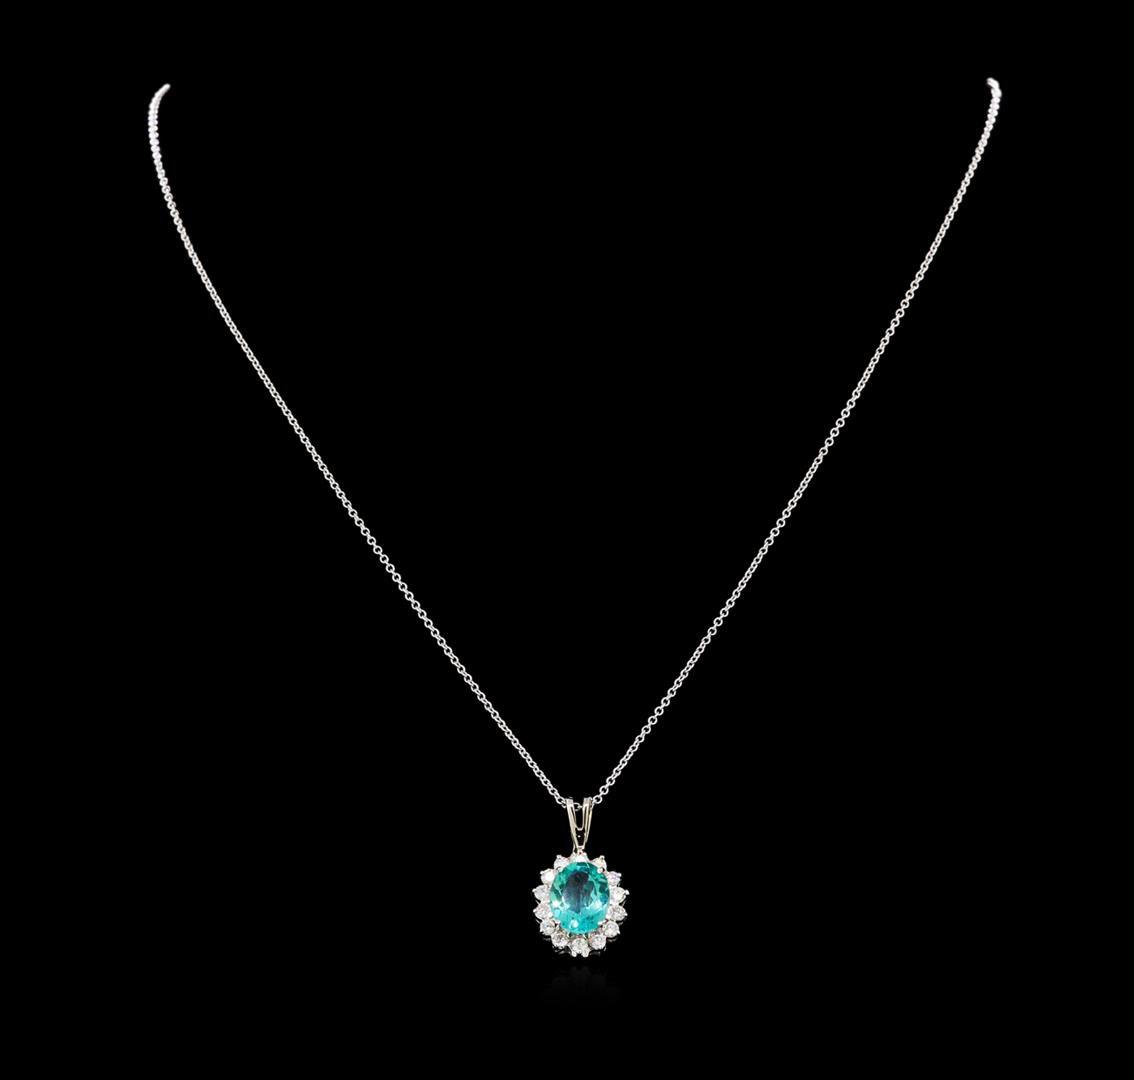 2.52 ctw Apatite and Diamond Pendant With Chain - 14KT White Gold